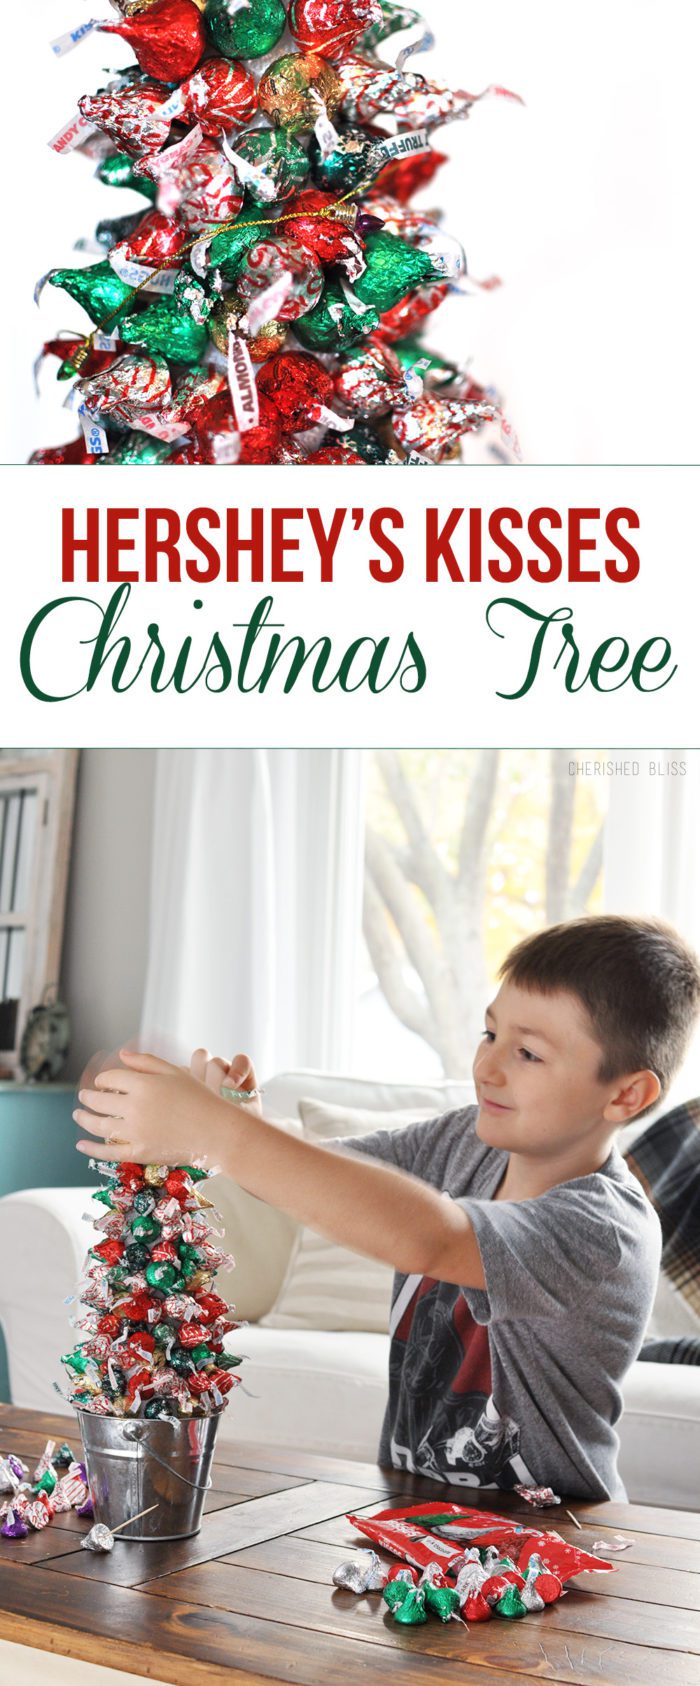 Create beautiful memories with your family by making a simple Hershey's Kisses Christmas Tree! 